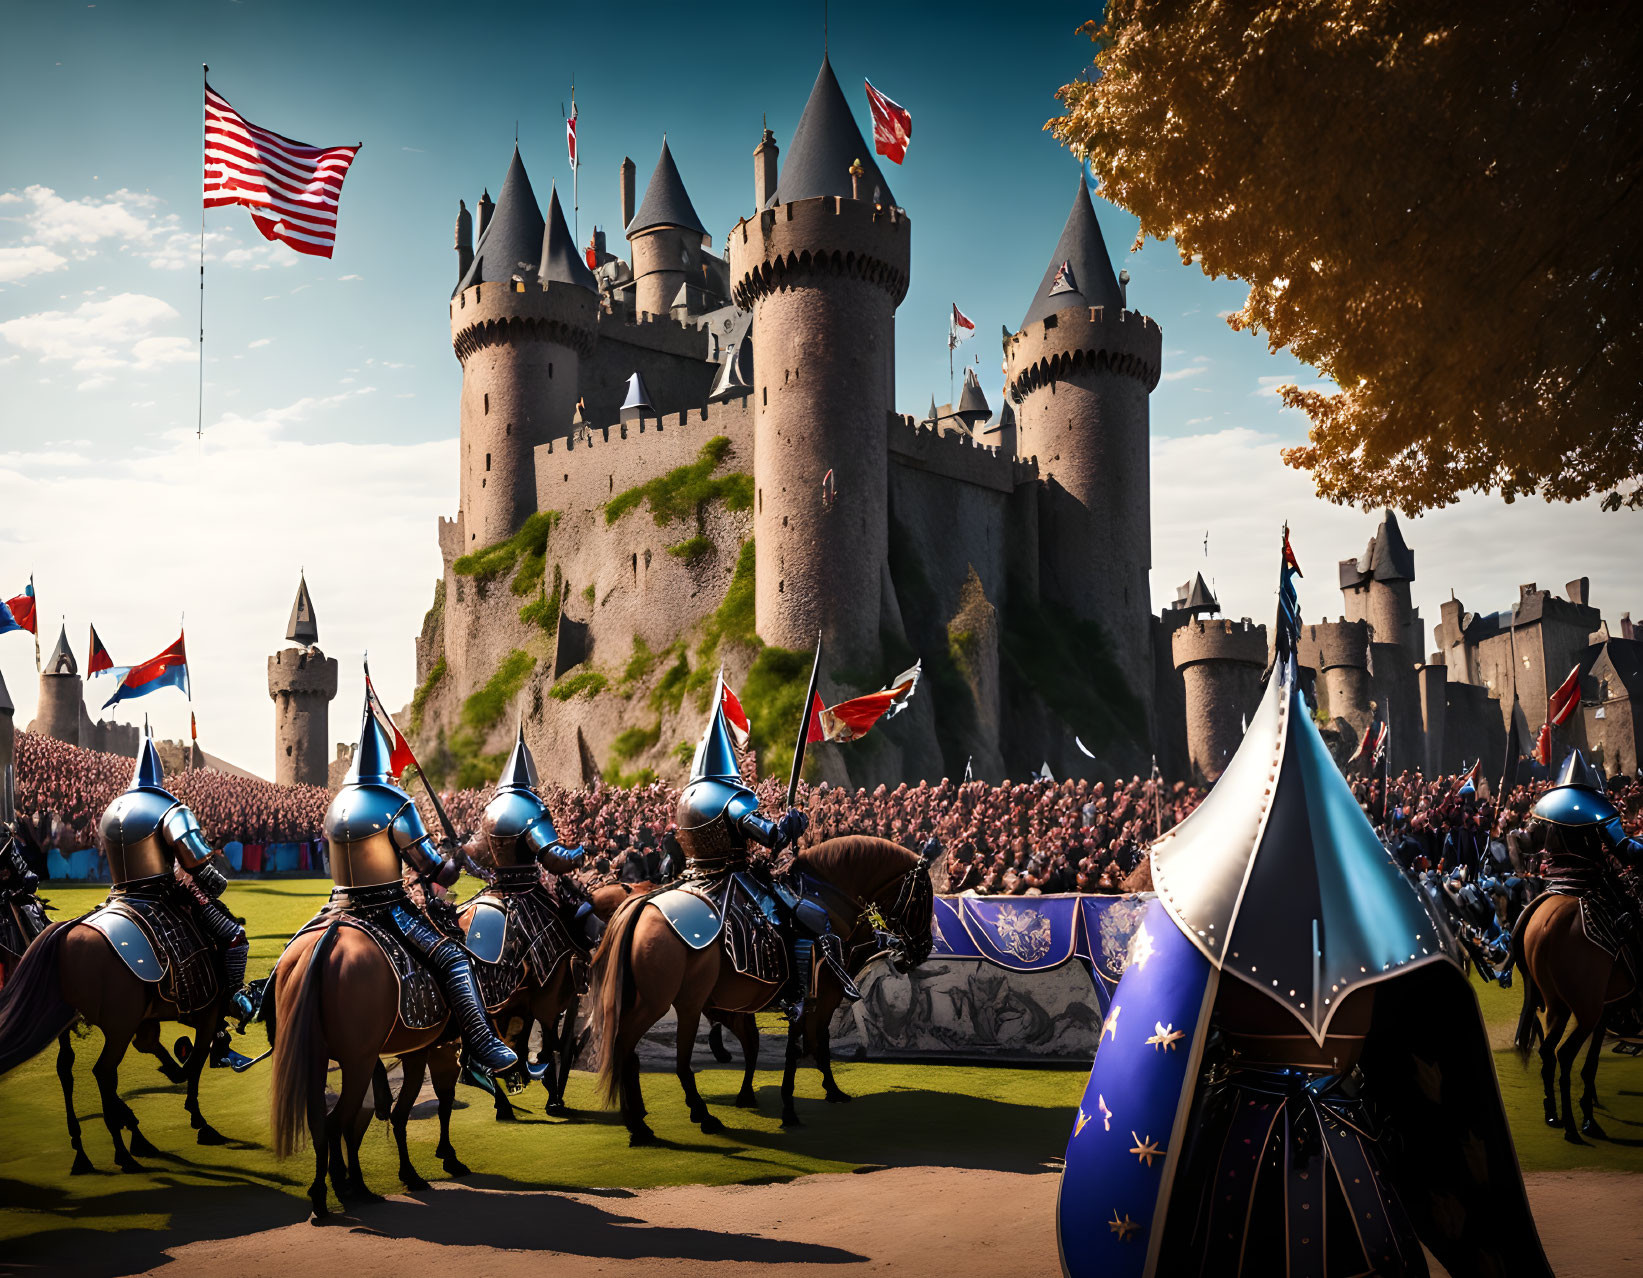 Medieval castle with knights on horseback and crowds gathering